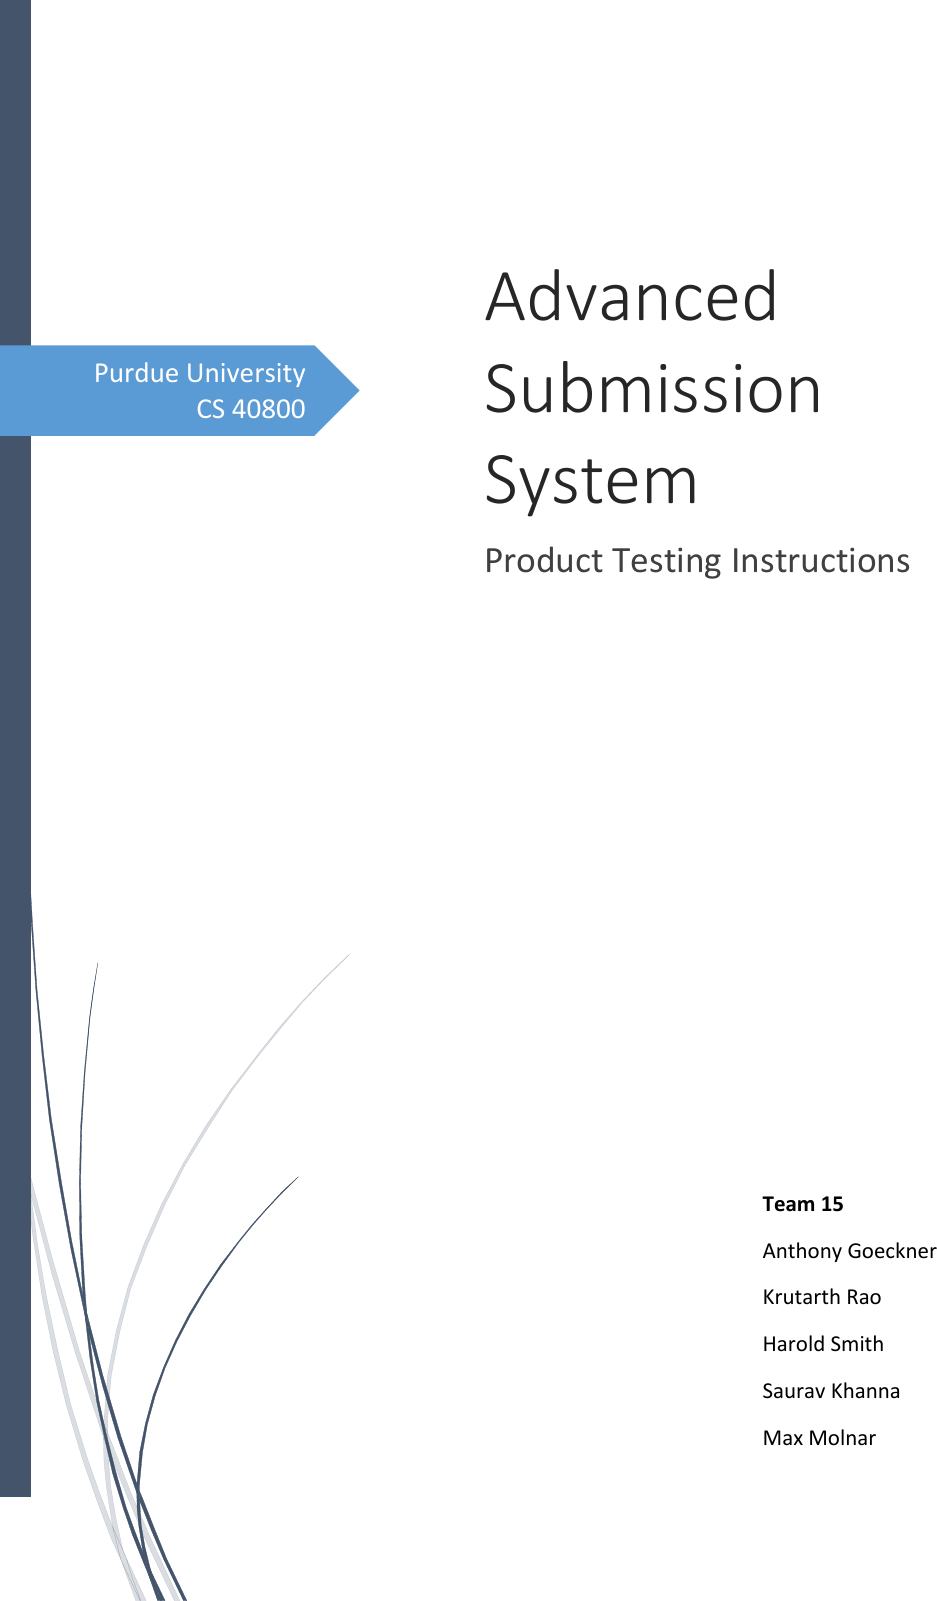 Page 1 of 6 - Advanced Submission System Product Ing Instructions